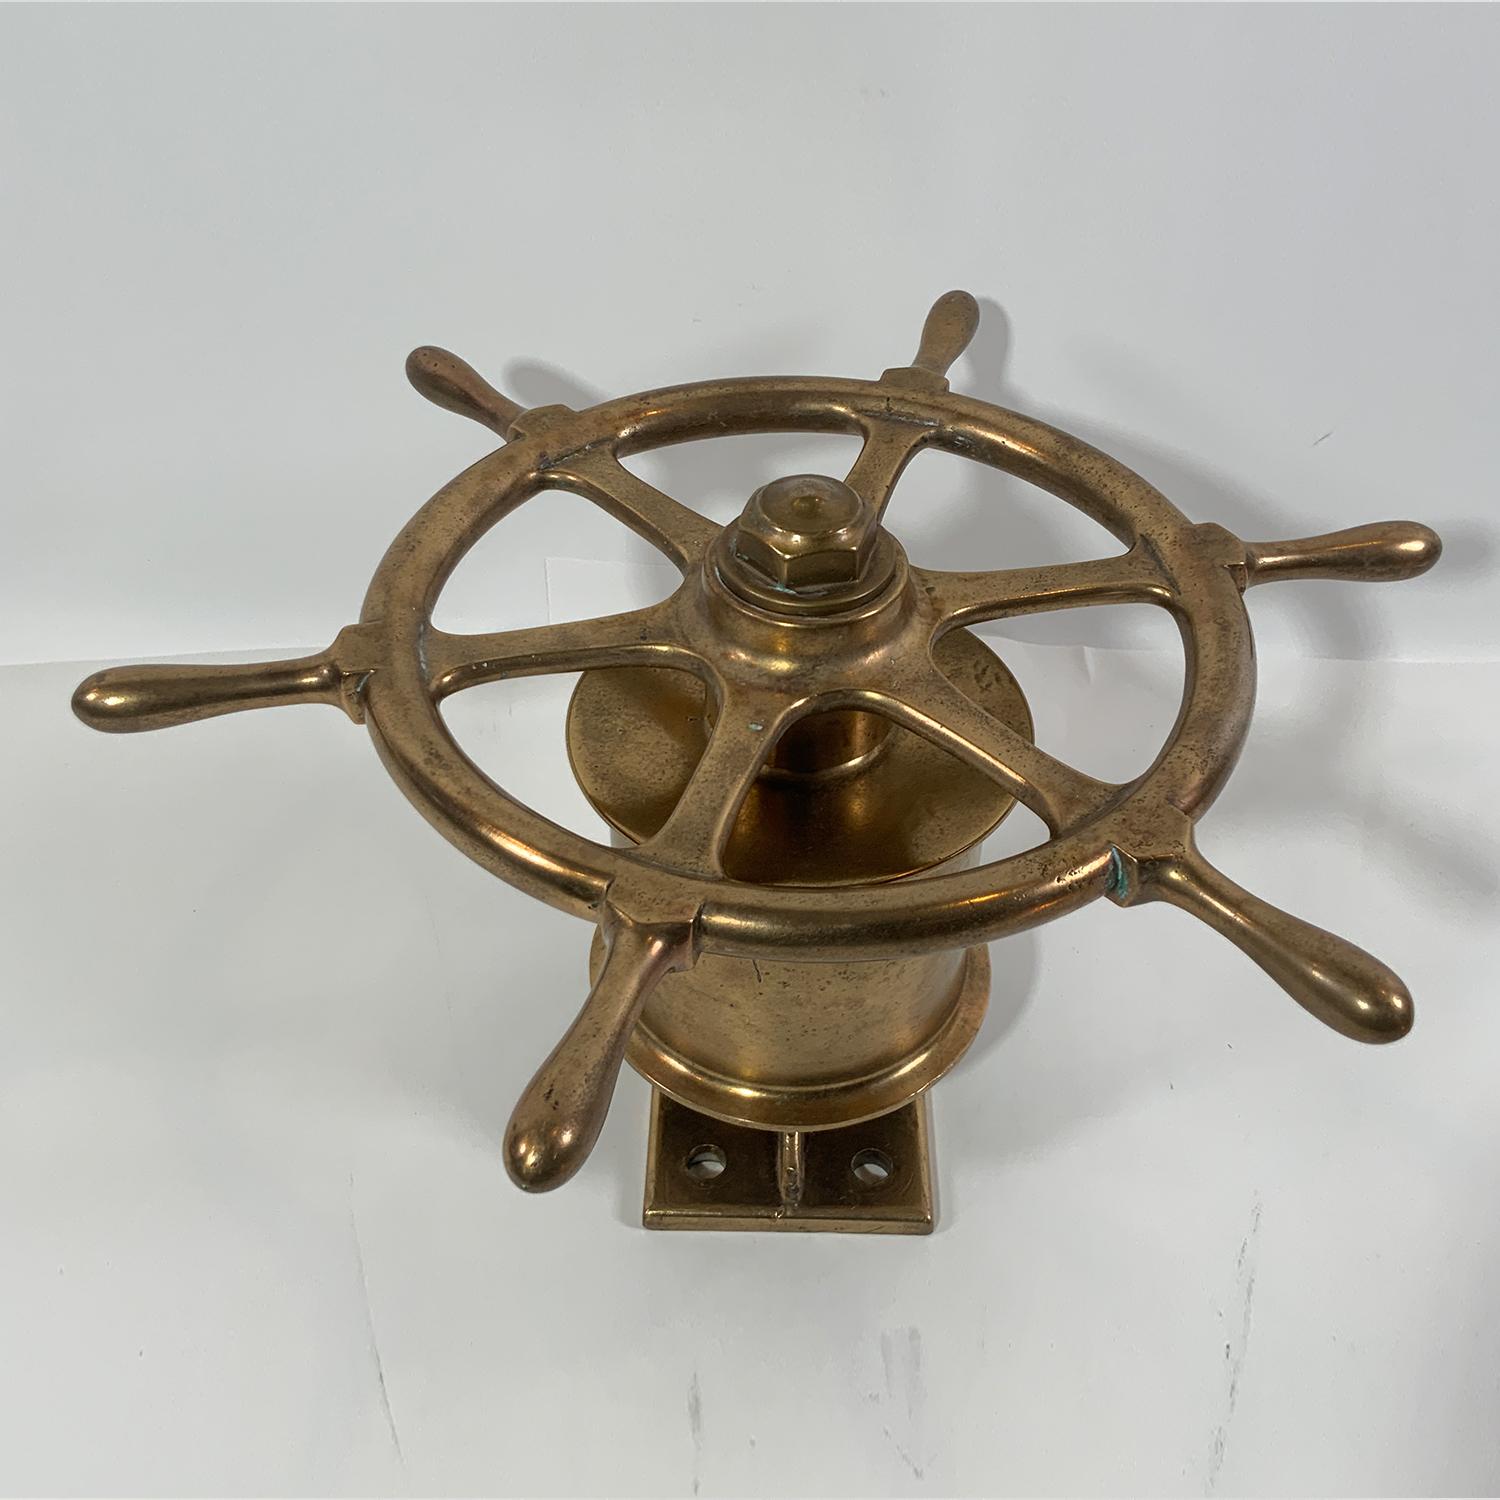 Lacquered Solid Brass Yacht or Boat Wheel